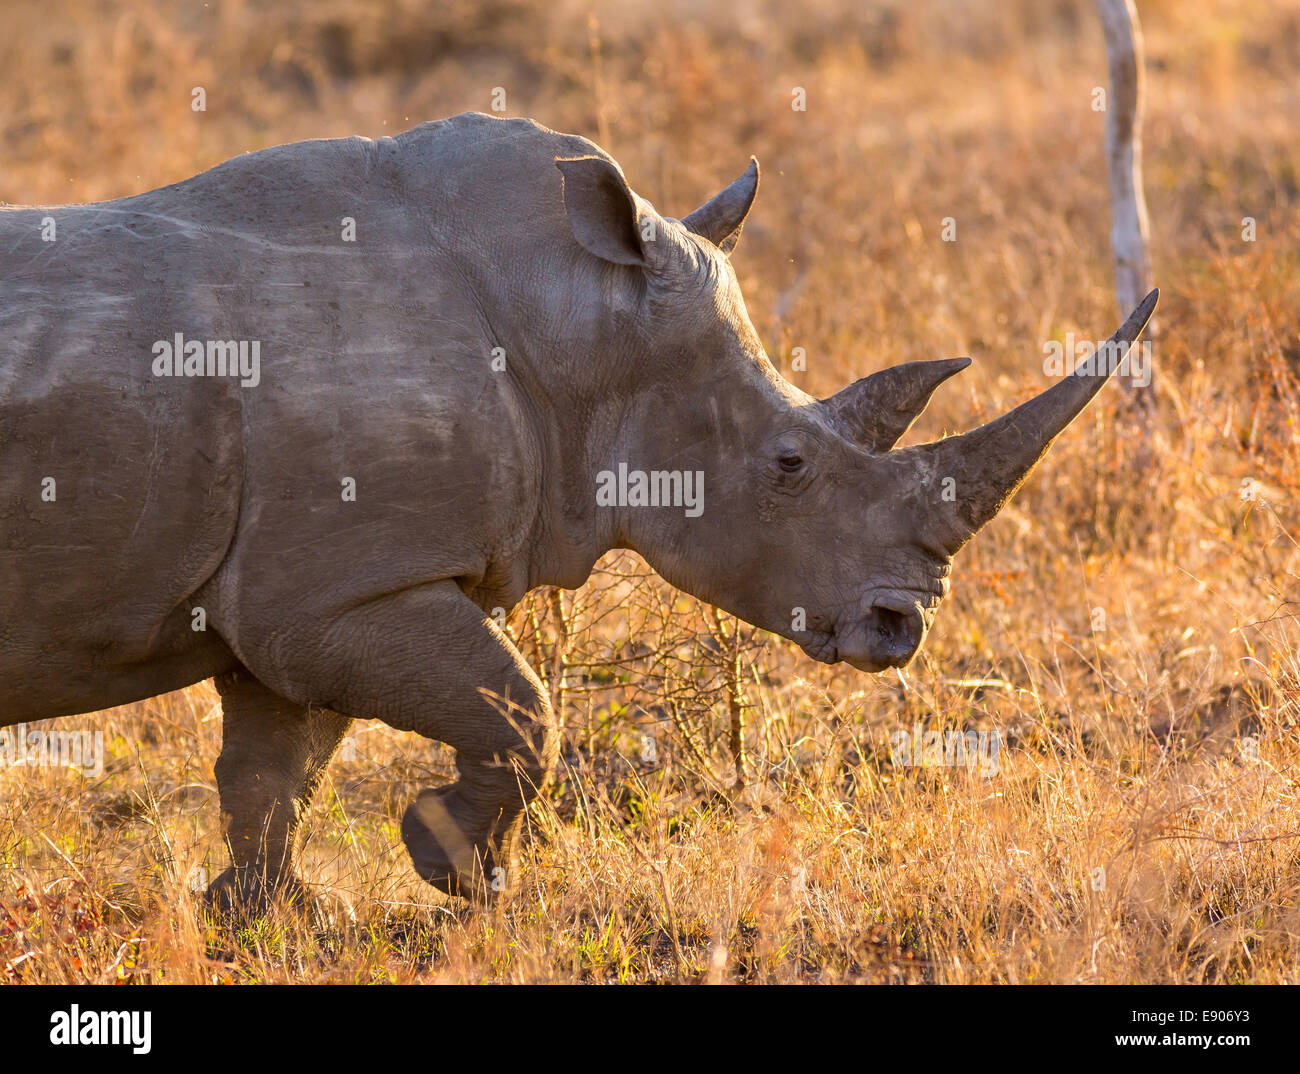 KRUGER NATIONAL PARK, SOUTH AFRICA - White rhino Stock Photo